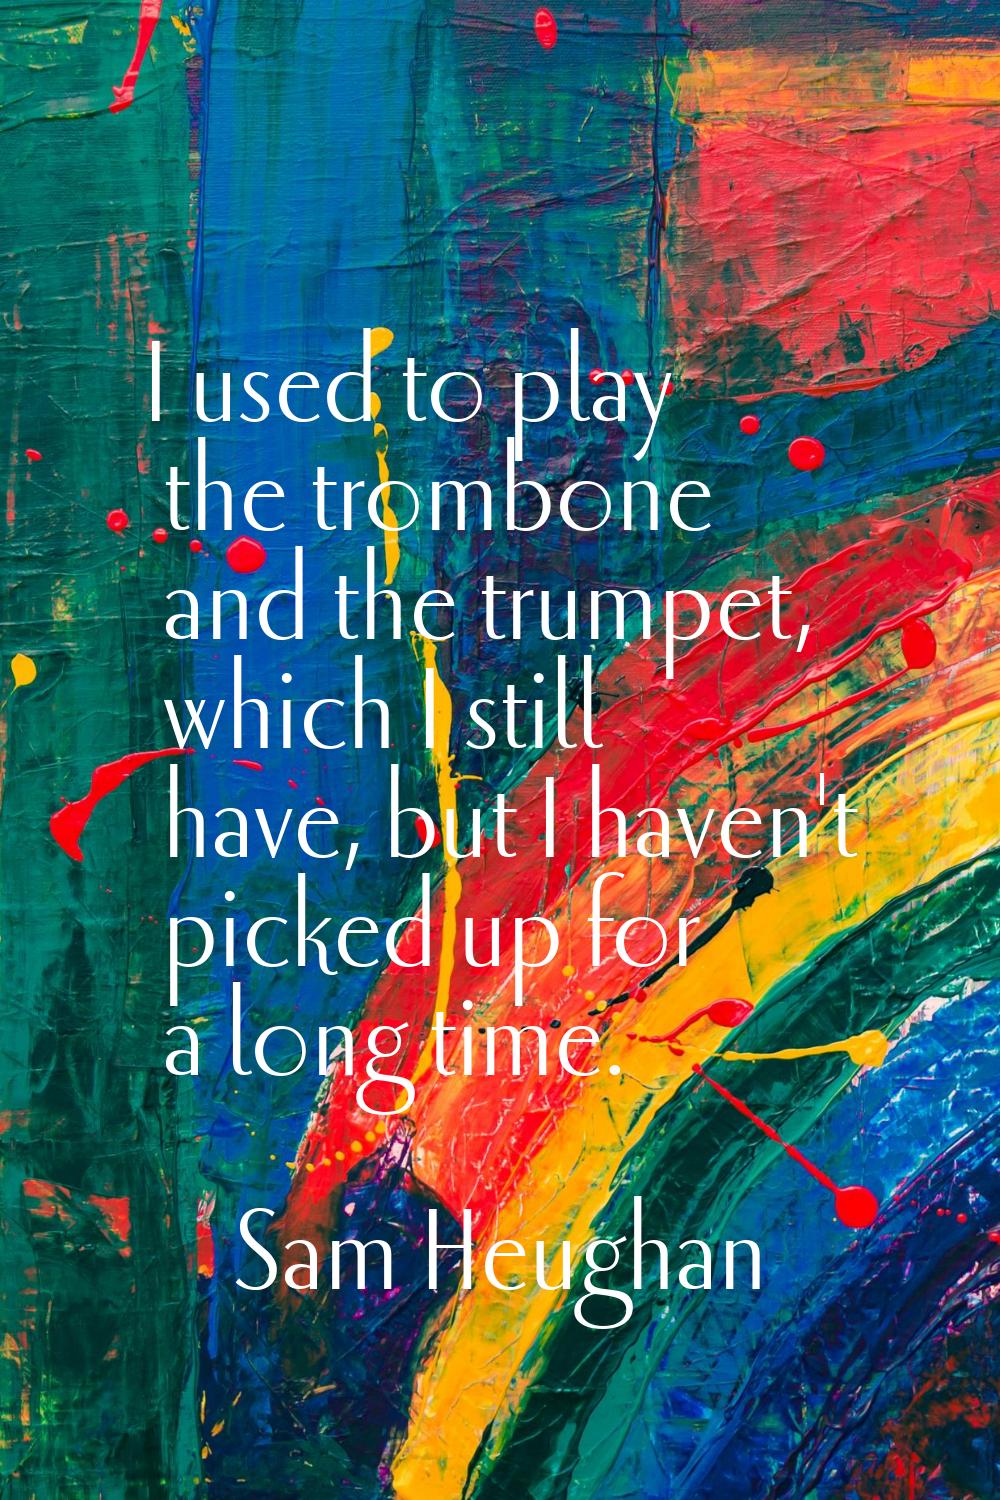 I used to play the trombone and the trumpet, which I still have, but I haven't picked up for a long